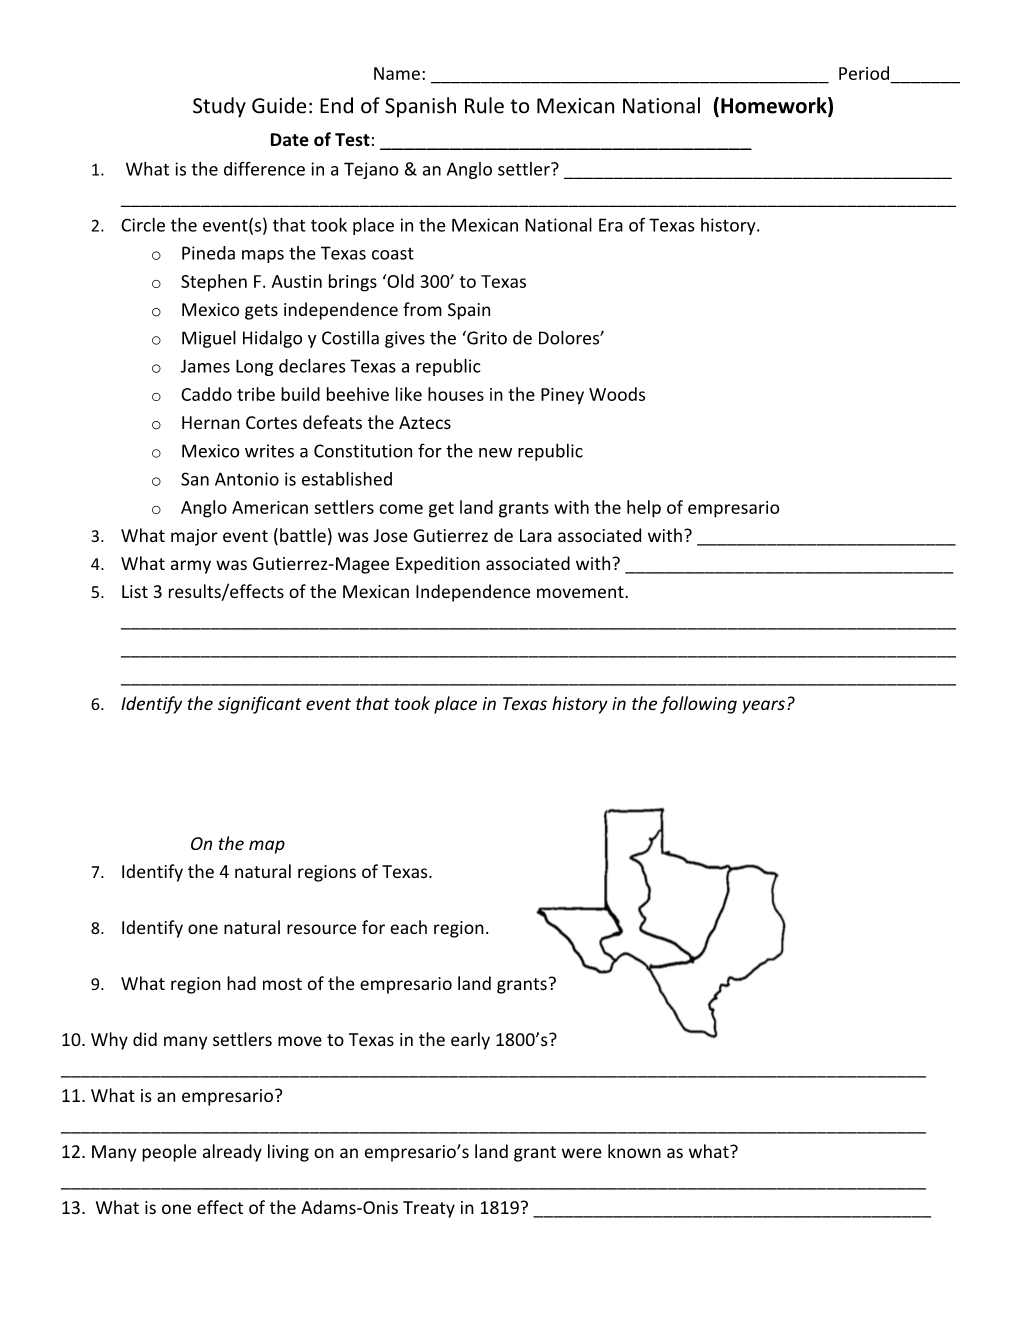 Study Guide: End of Spanish Rule to Mexican National (Homework)